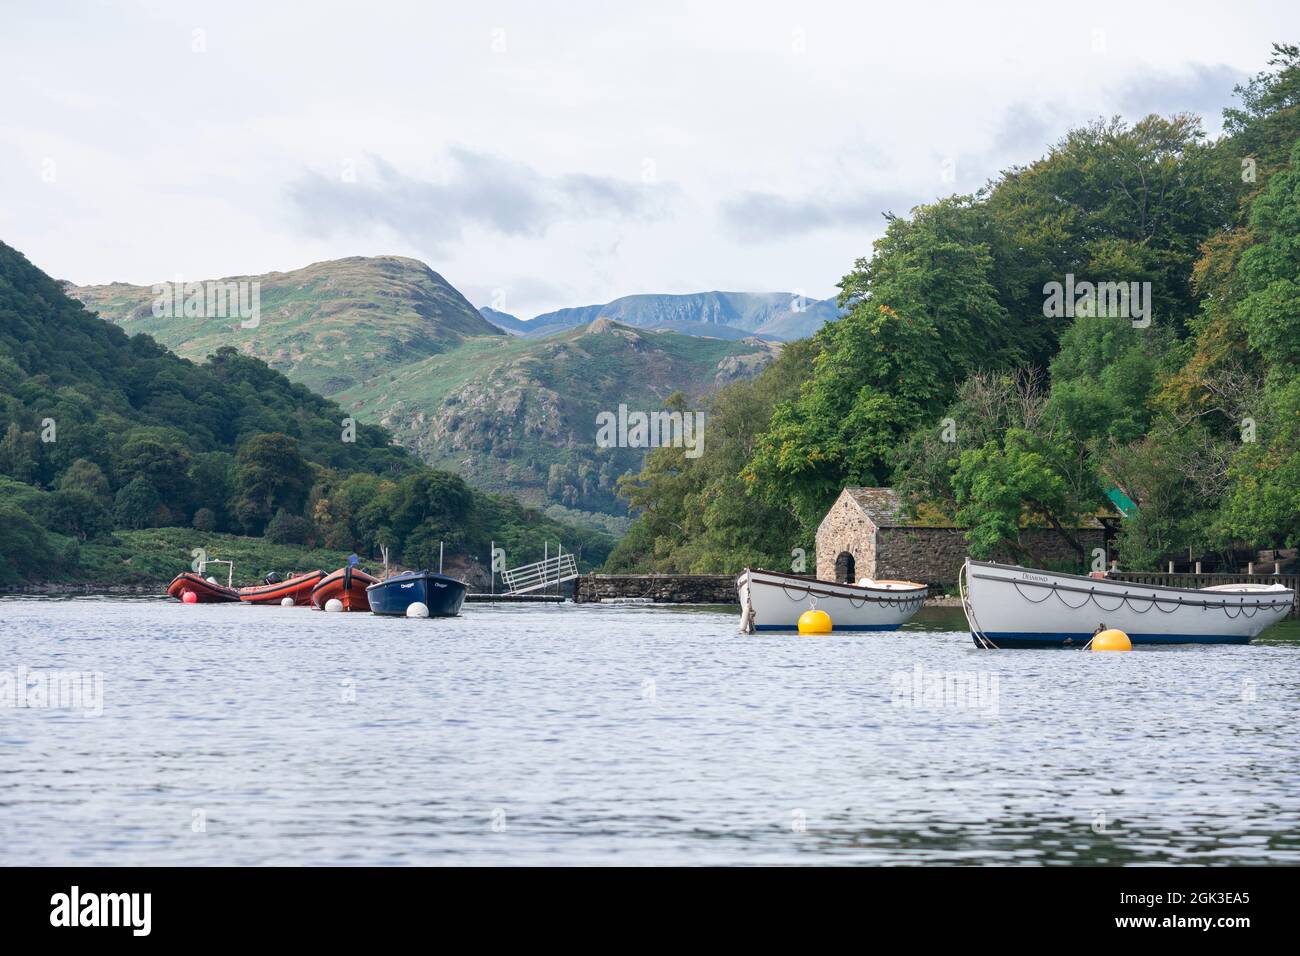 Moored boats on Ullswater with Helvellyn and mountains behind, Lake District, Cumbria, UK Stock Photo